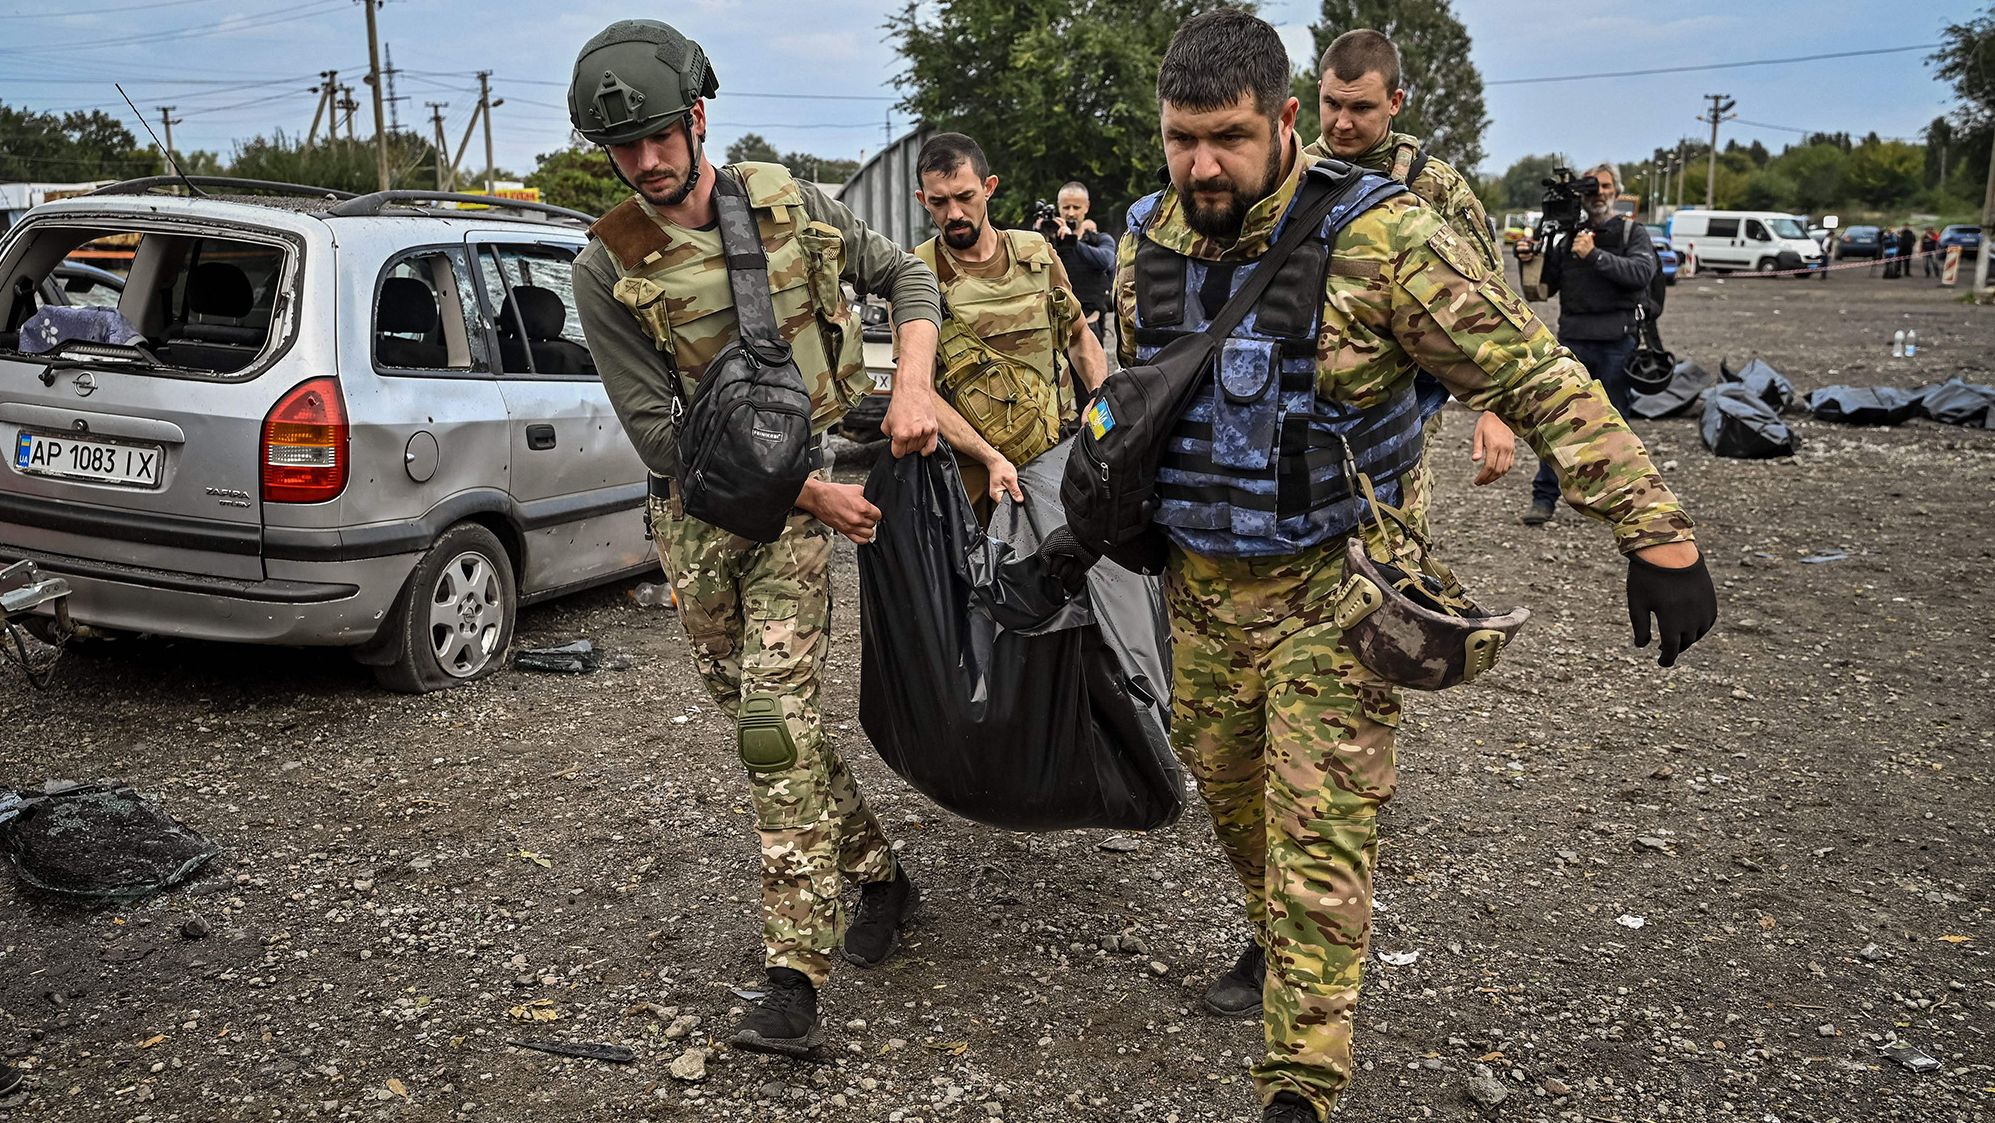 Ukrainian servicemen carry a body bag at the site of a missile <a href="https://edition.cnn.com/europe/live-news/russia-ukraine-war-news-09-30-22/h_7b936e41381bad5f5e4f54e10972f15a" target="_blank">strike on a convoy of civilian cars</a> that killed at least 30 people near Zaporizhzhia, Ukraine, on September 30.